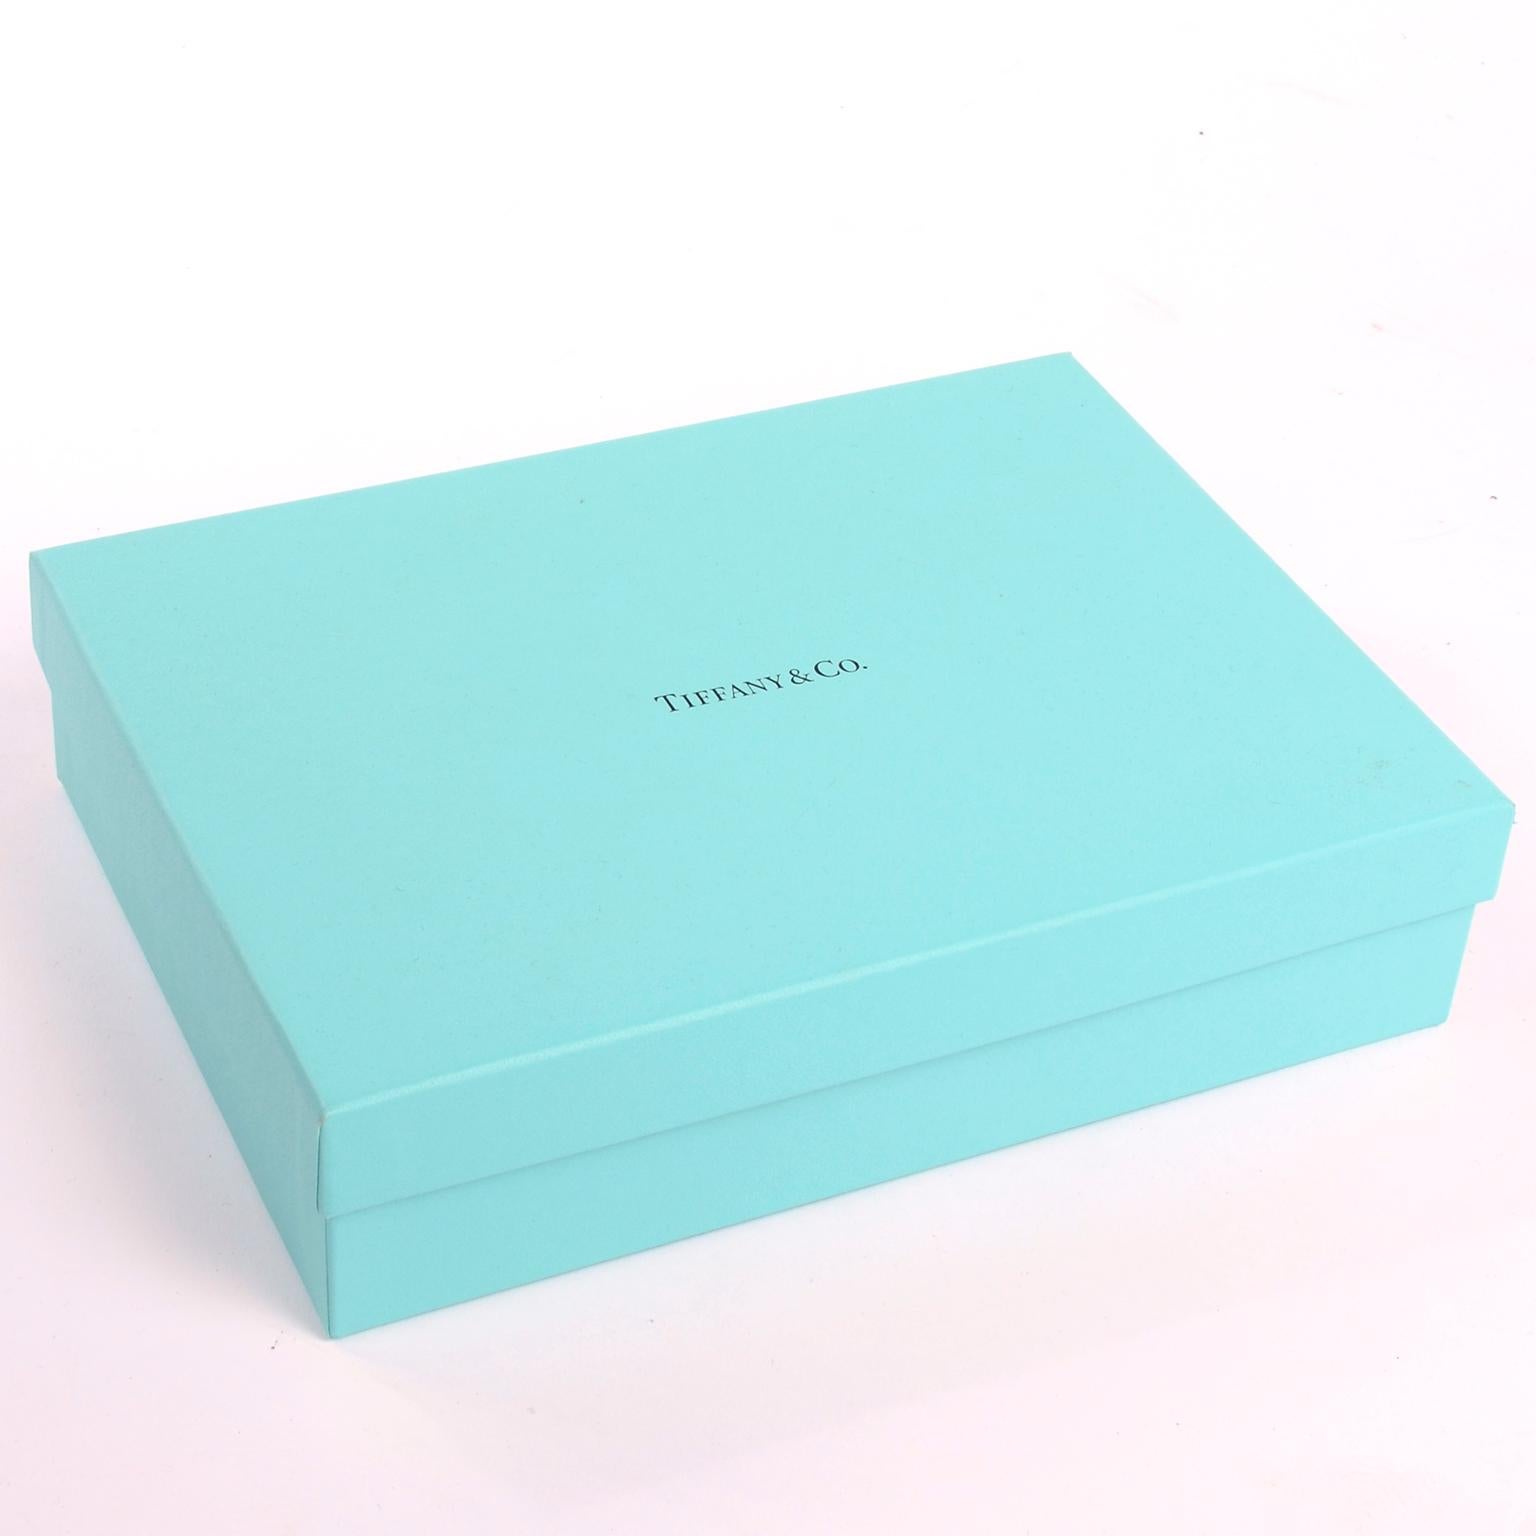 Tiffany & Co Brown Leather Wallet New in Original Blue Box With Dustbag 1